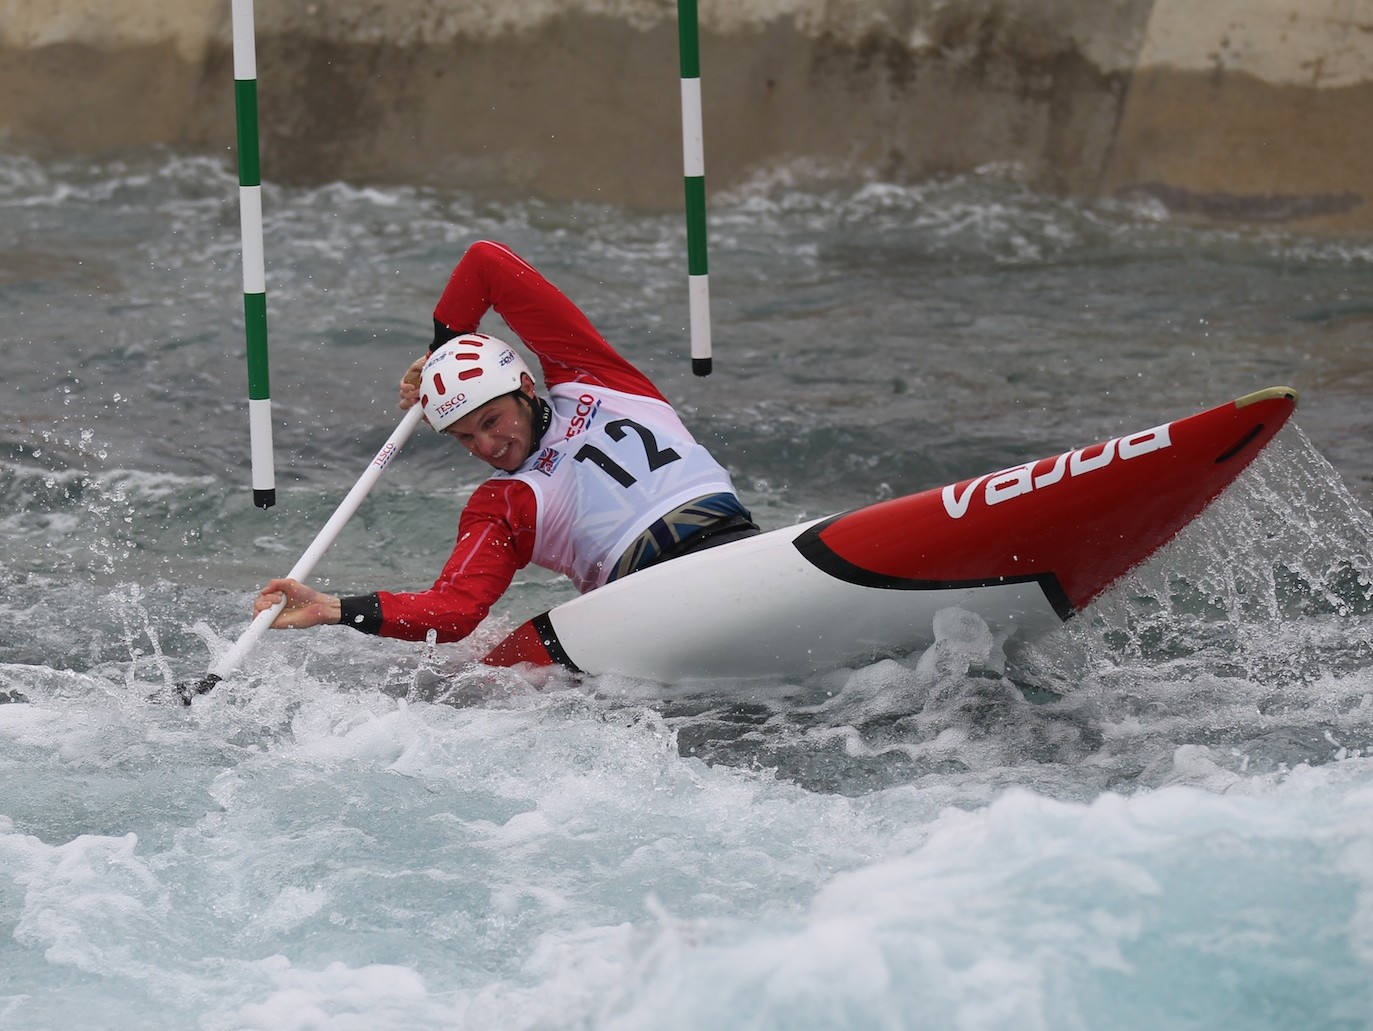 Mark Proctor, on the Lee Valley Whitewater course, sinking the back of 